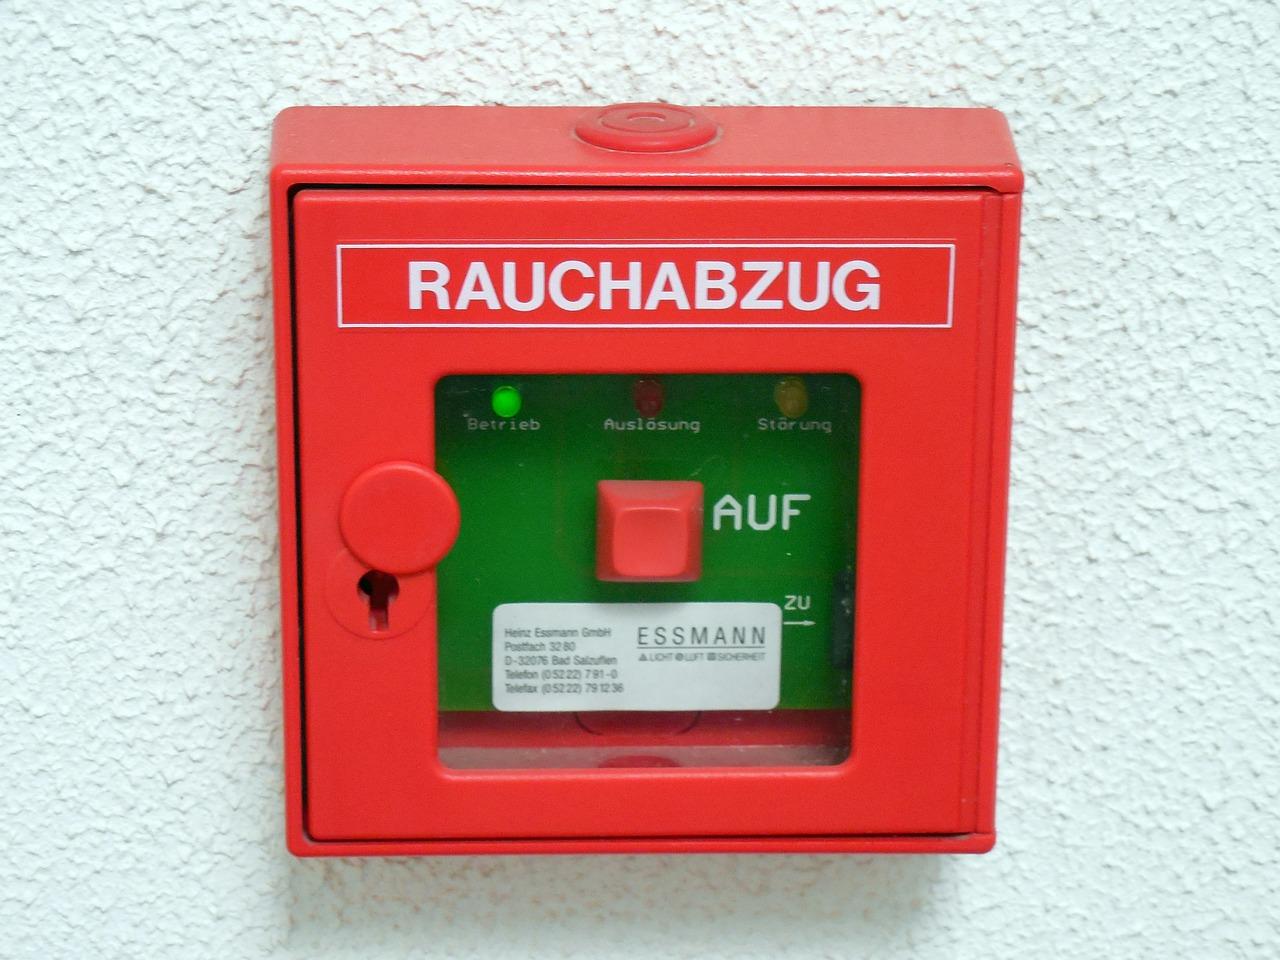 Why Fire Alarm Systems Are Necessary for Your Building